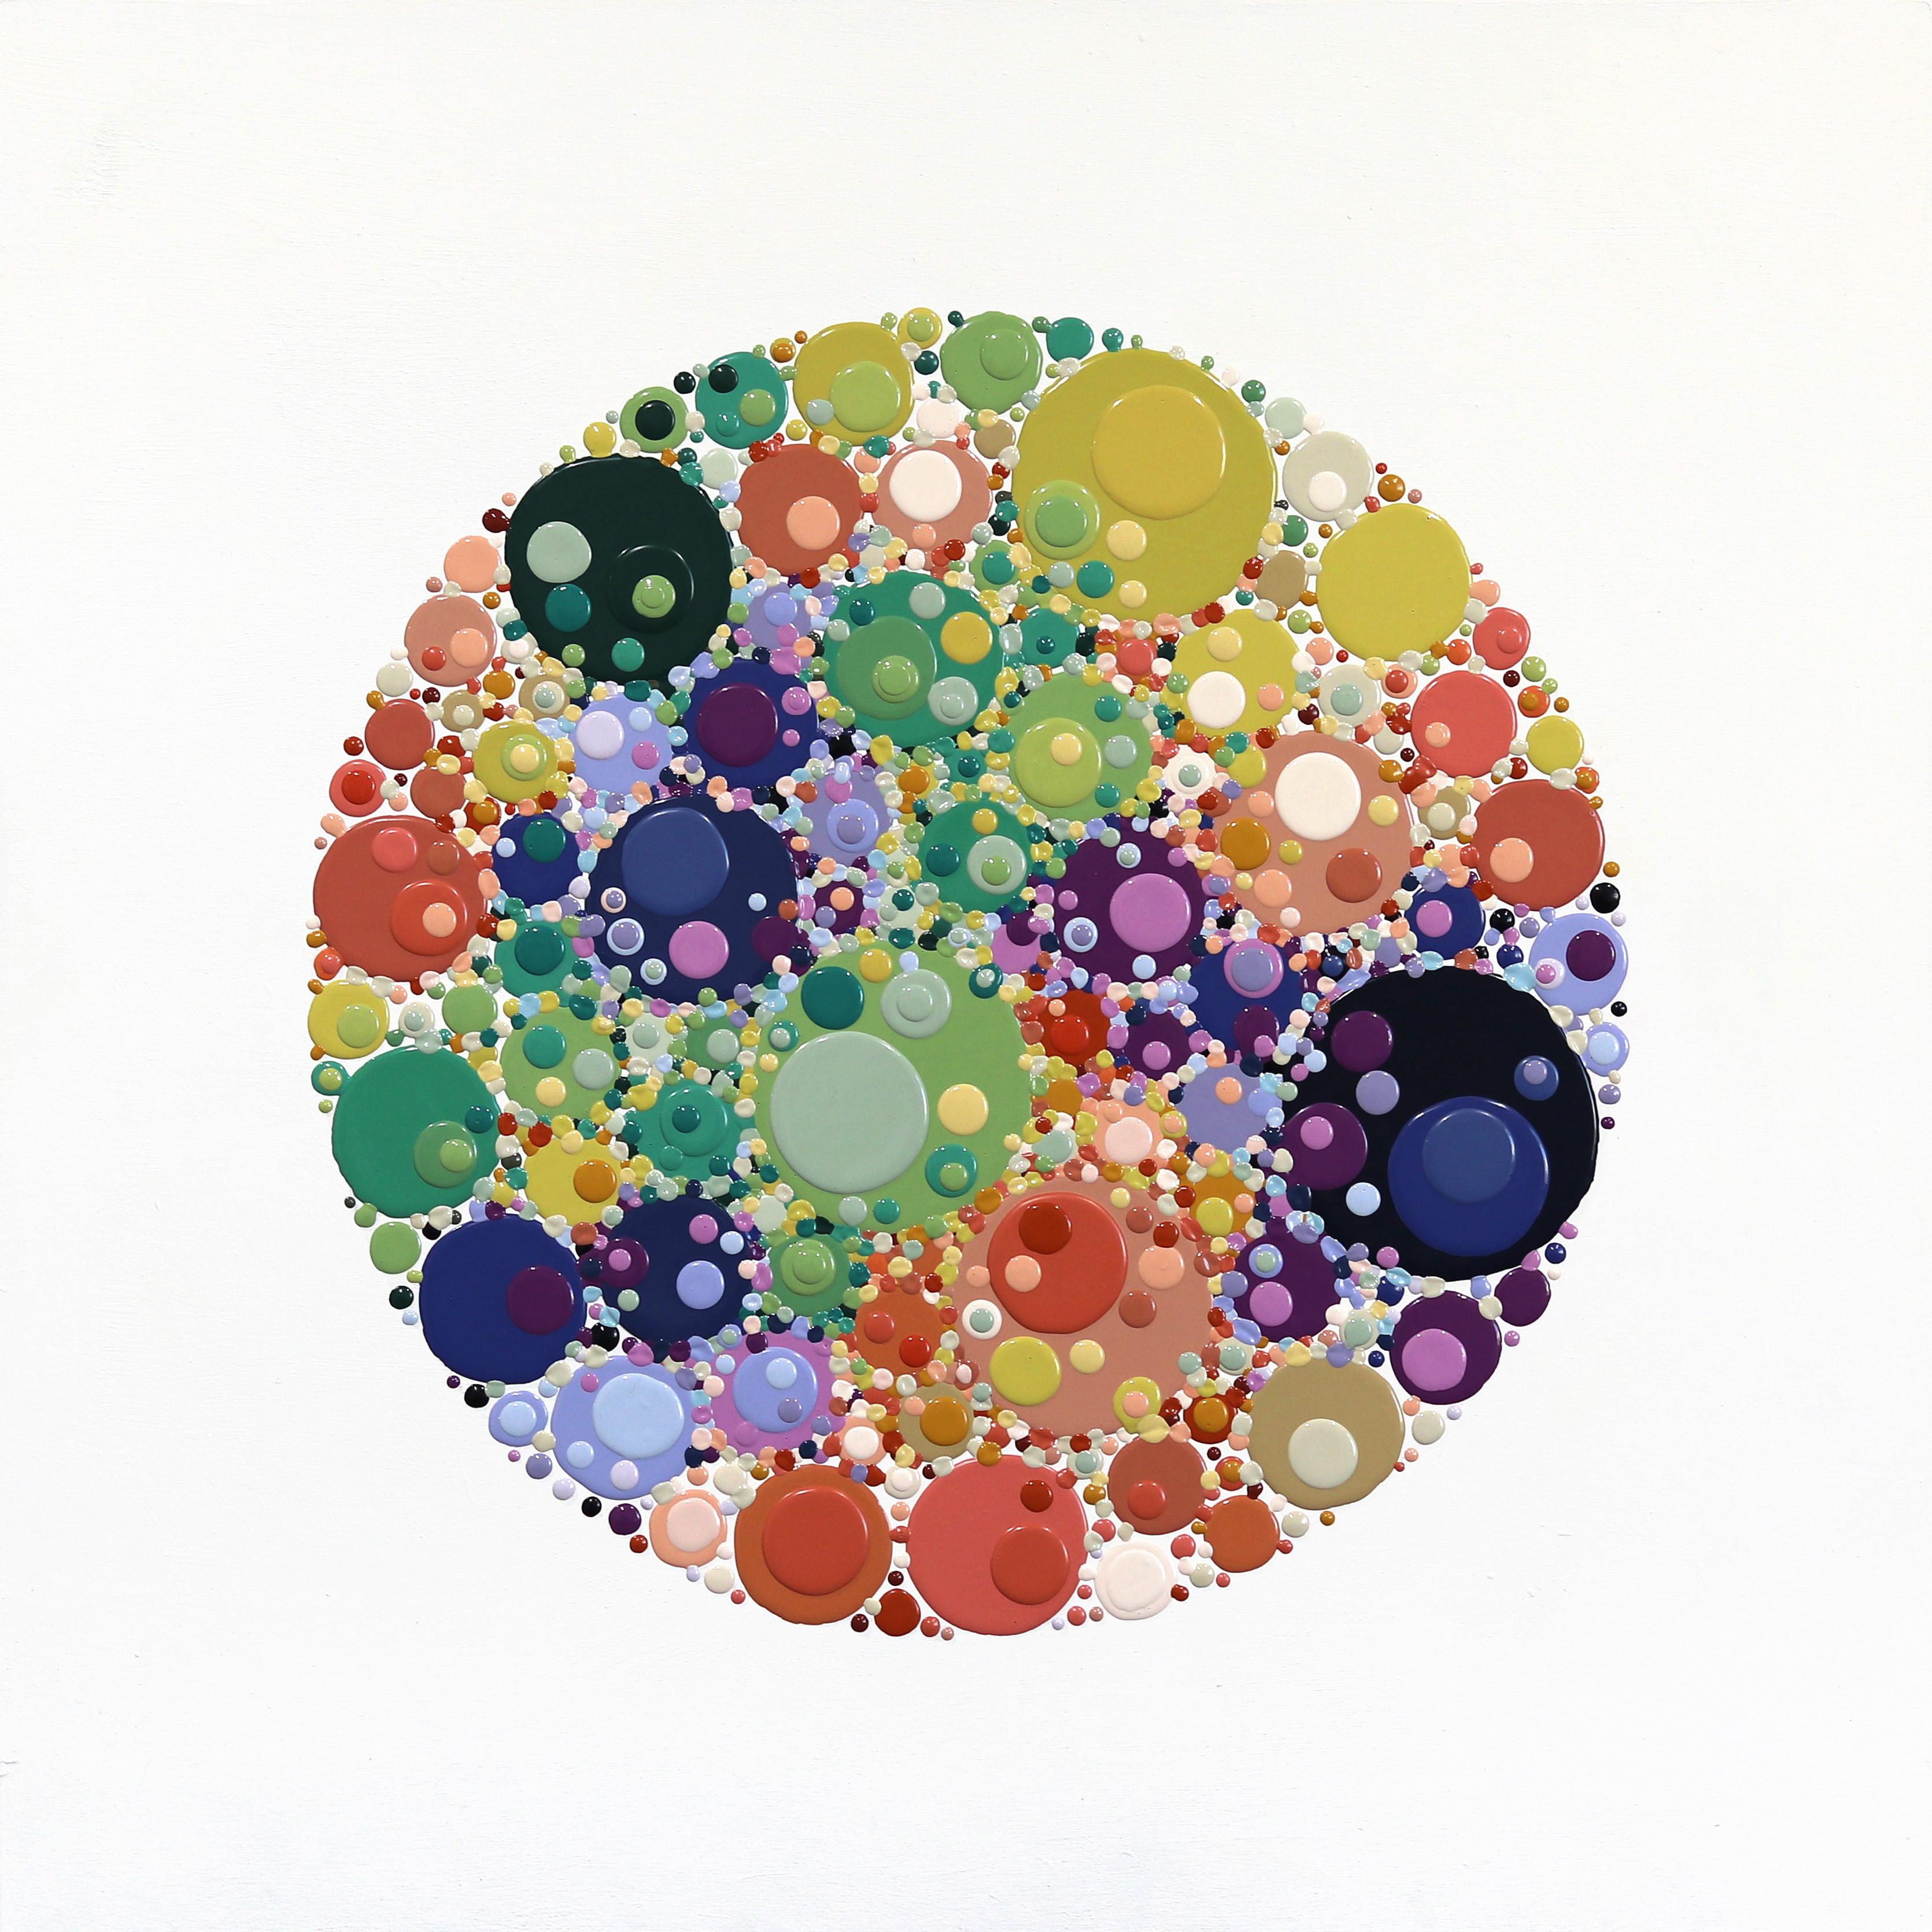 Juicy - Original Saturated Colorful Dots Paint Droplets by Kimberly Blackstock